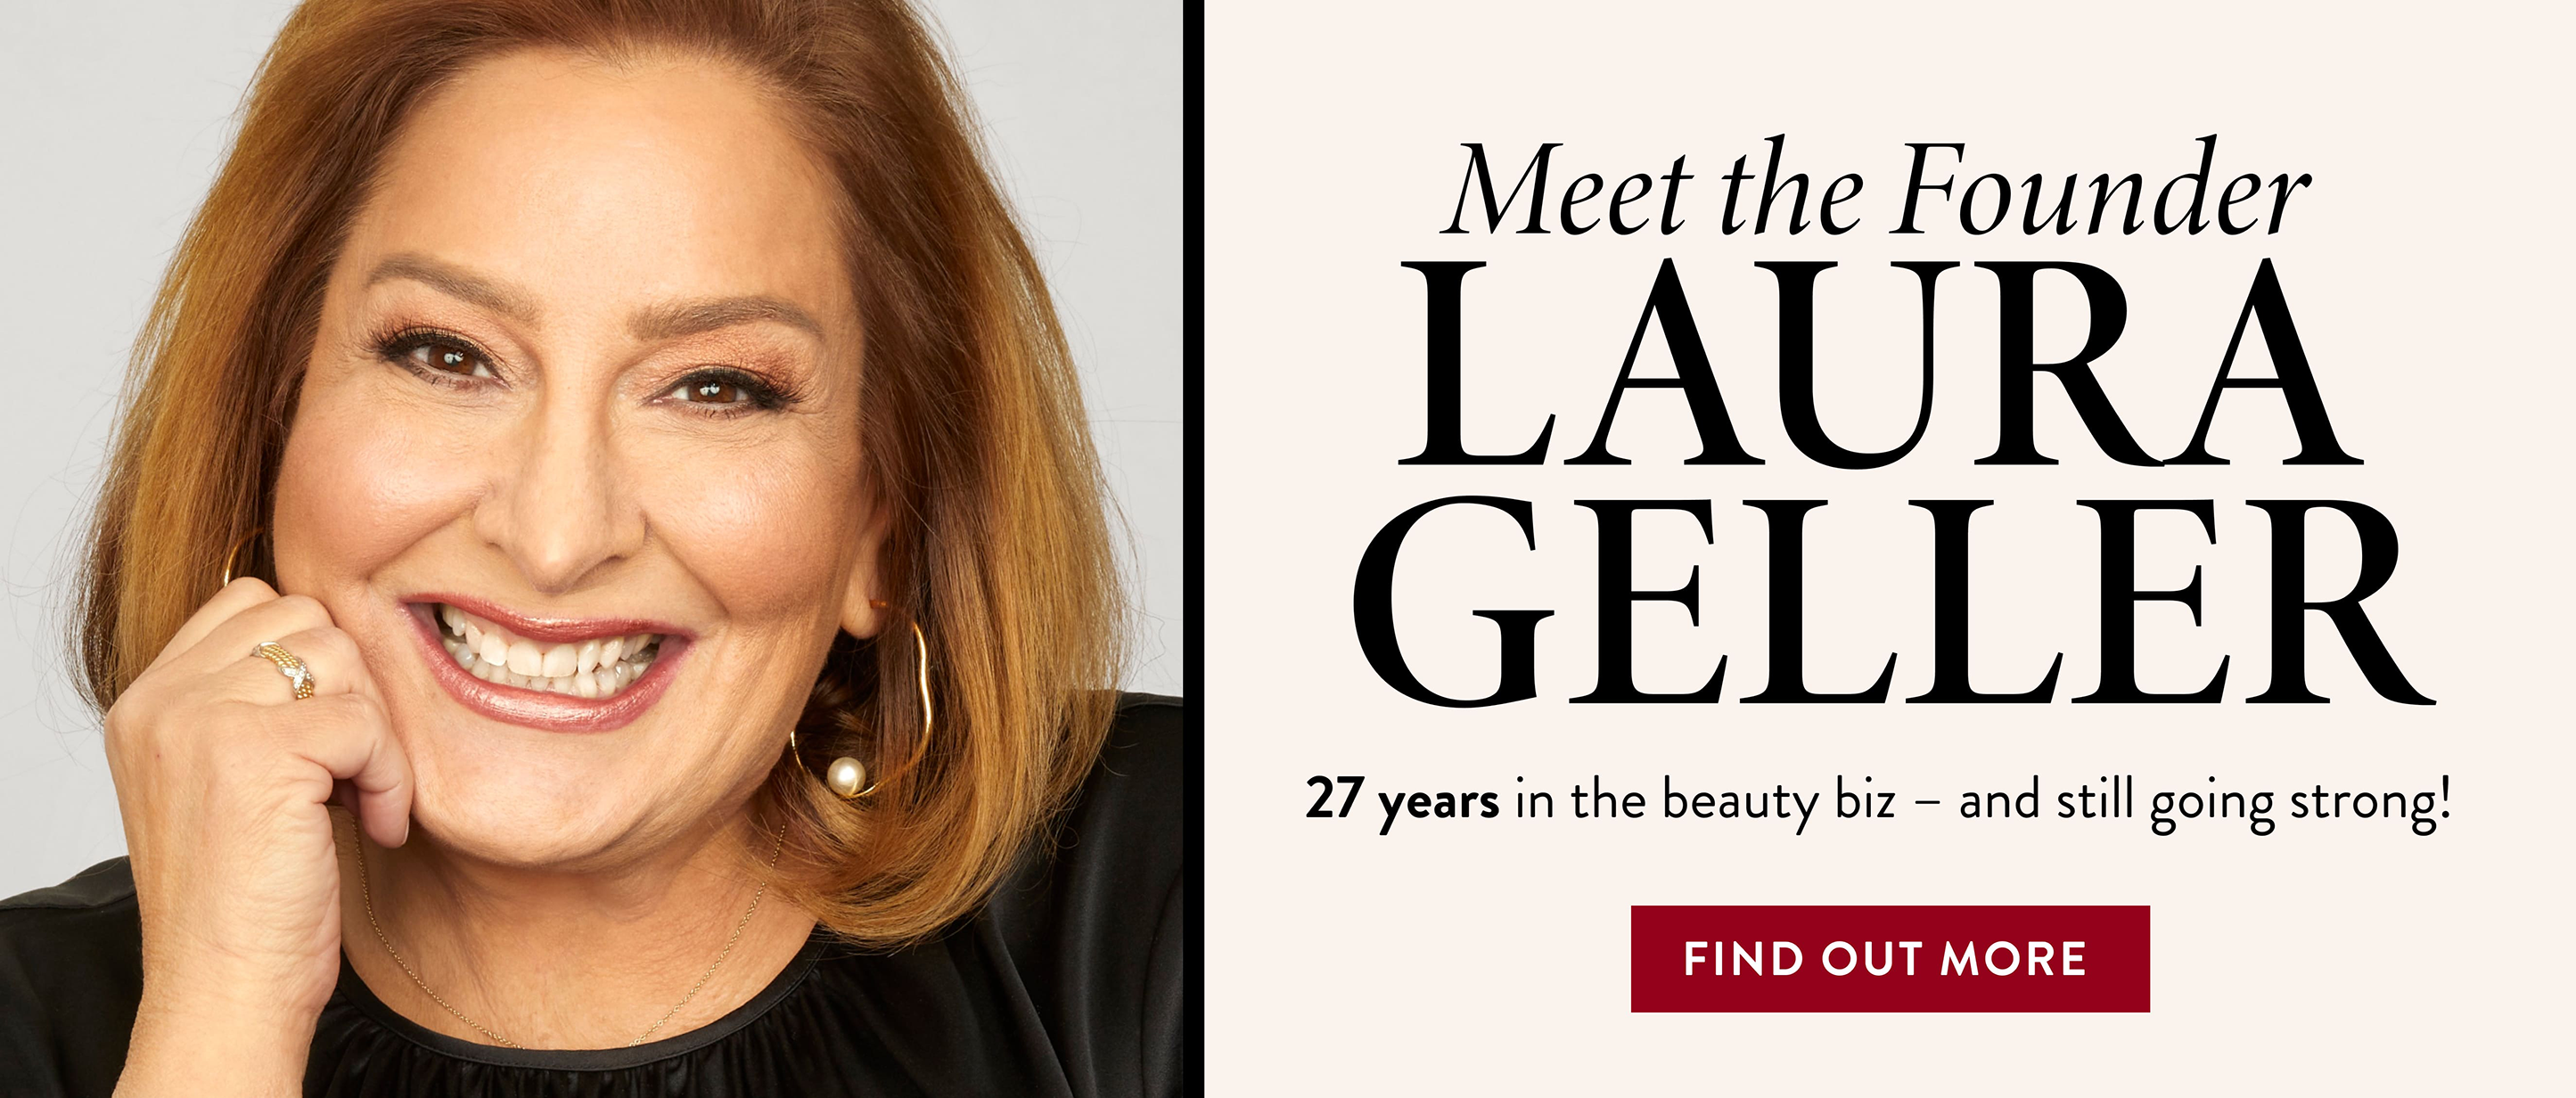 Meet the Founder, Laura Geller. 26 years in the beauty biz- and still going strong!